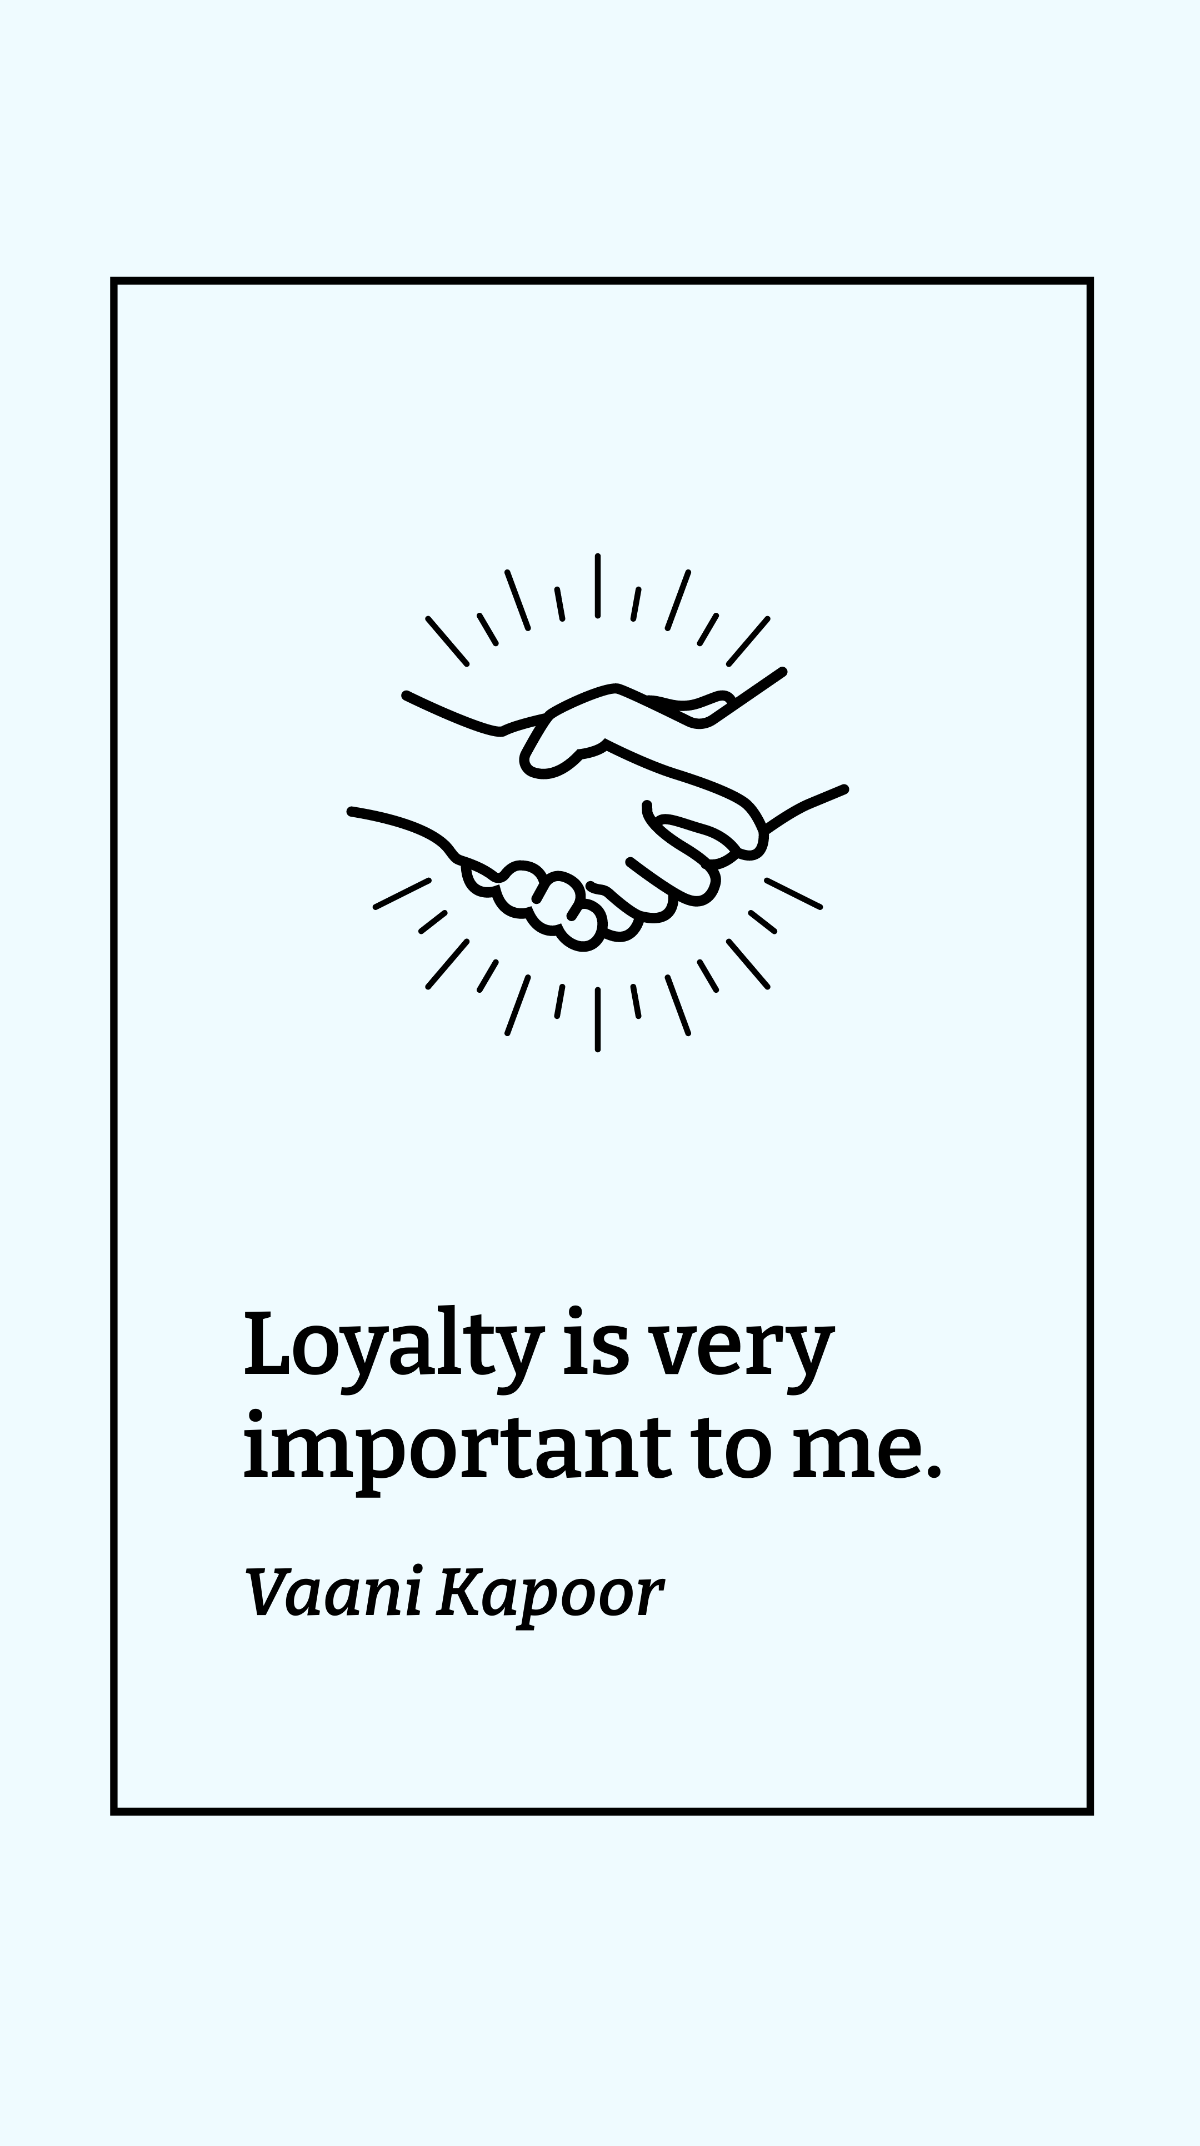 Vaani Kapoor - Loyalty is very important to me. Template